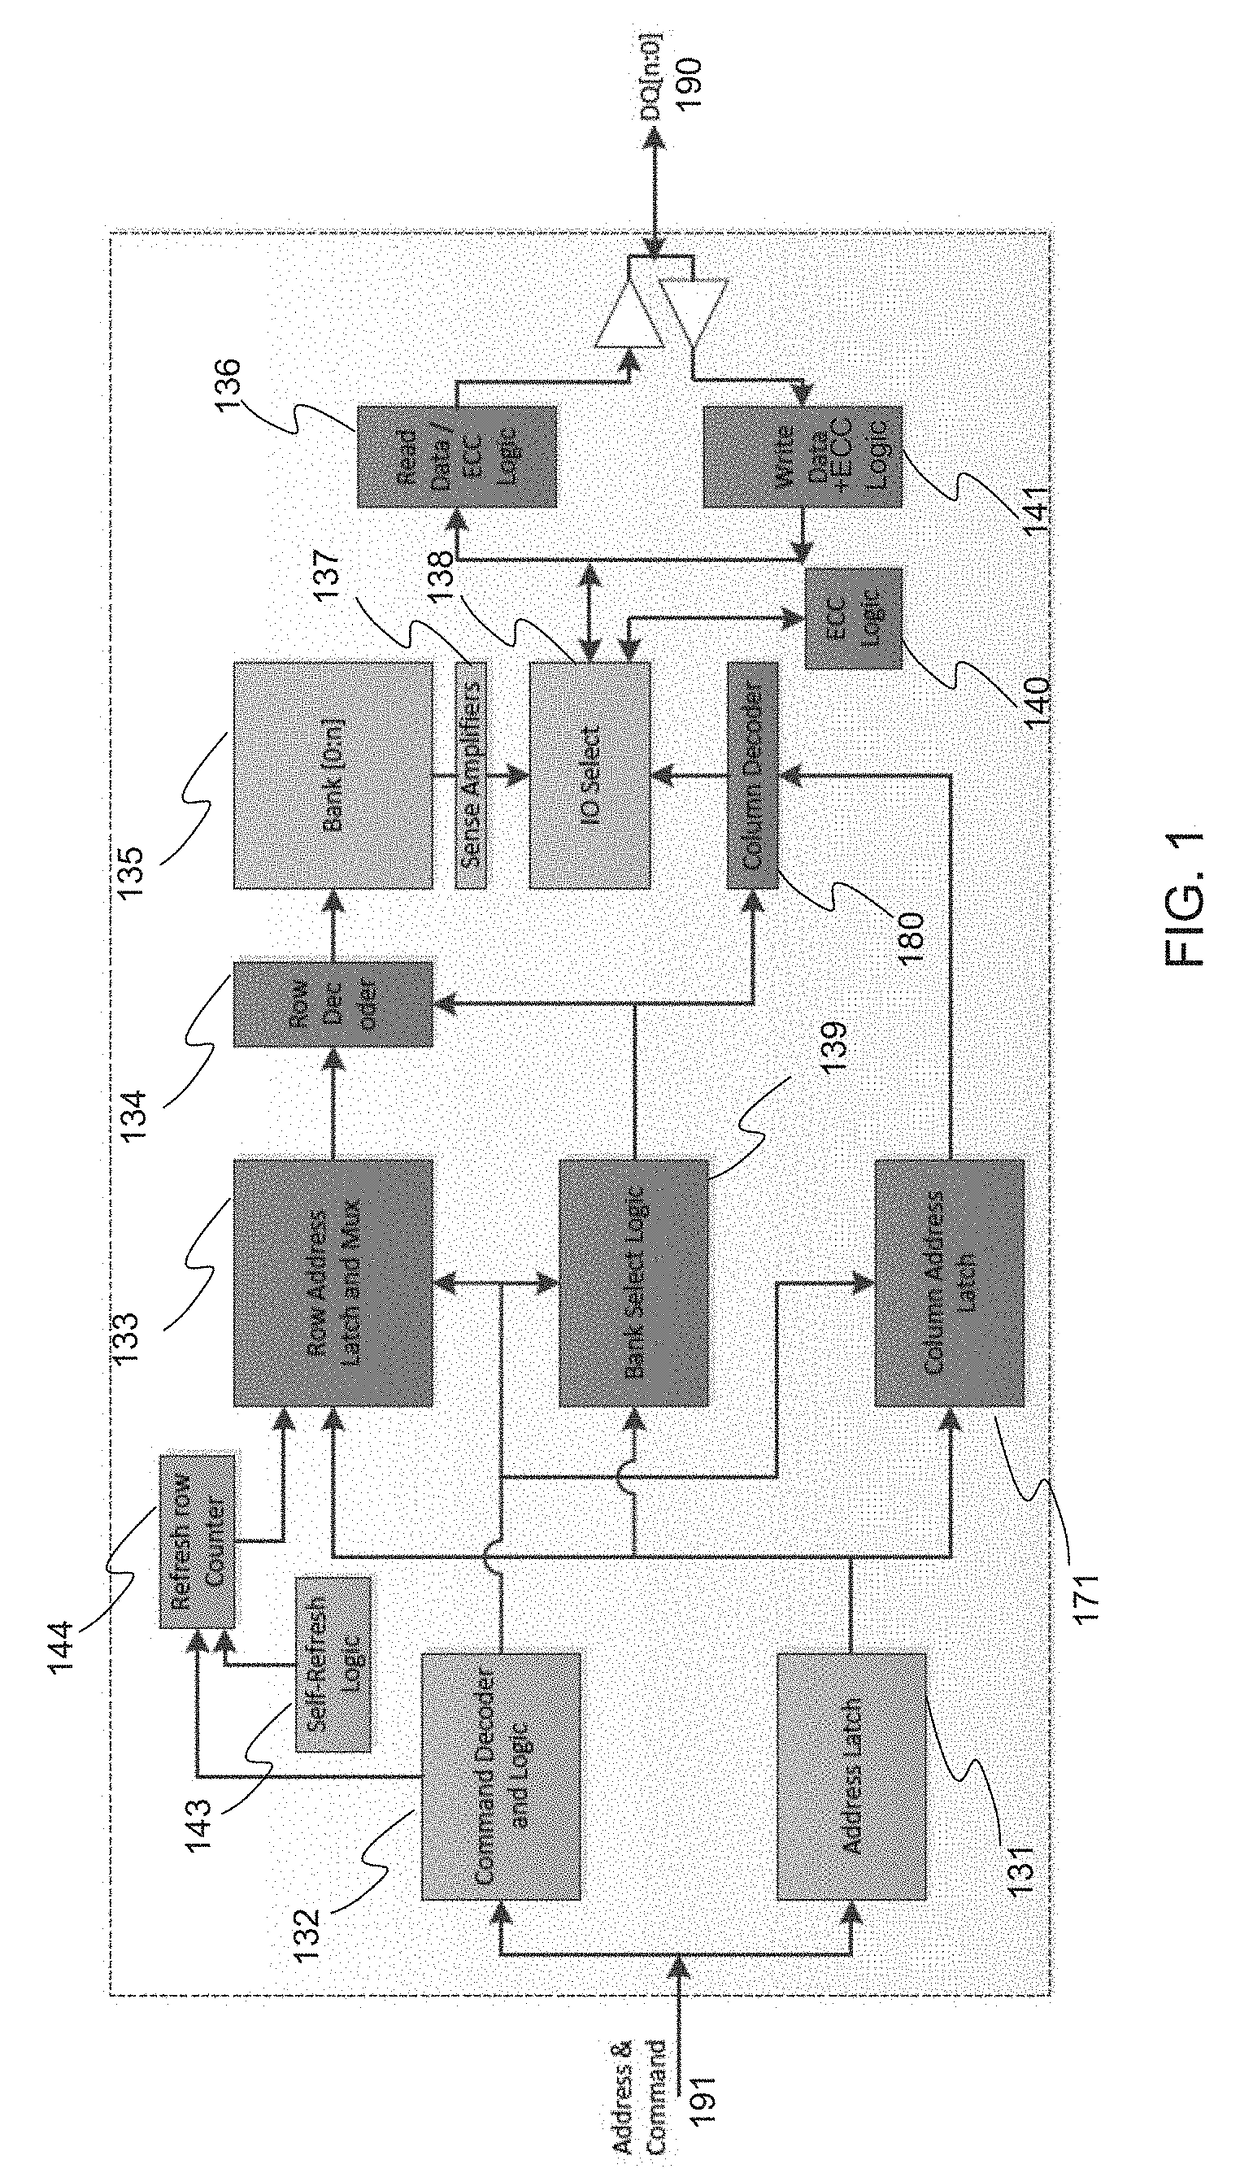 Method for memory scrub of DRAM with internal error correcting code (ECC) bits during either memory activate and/or precharge operation